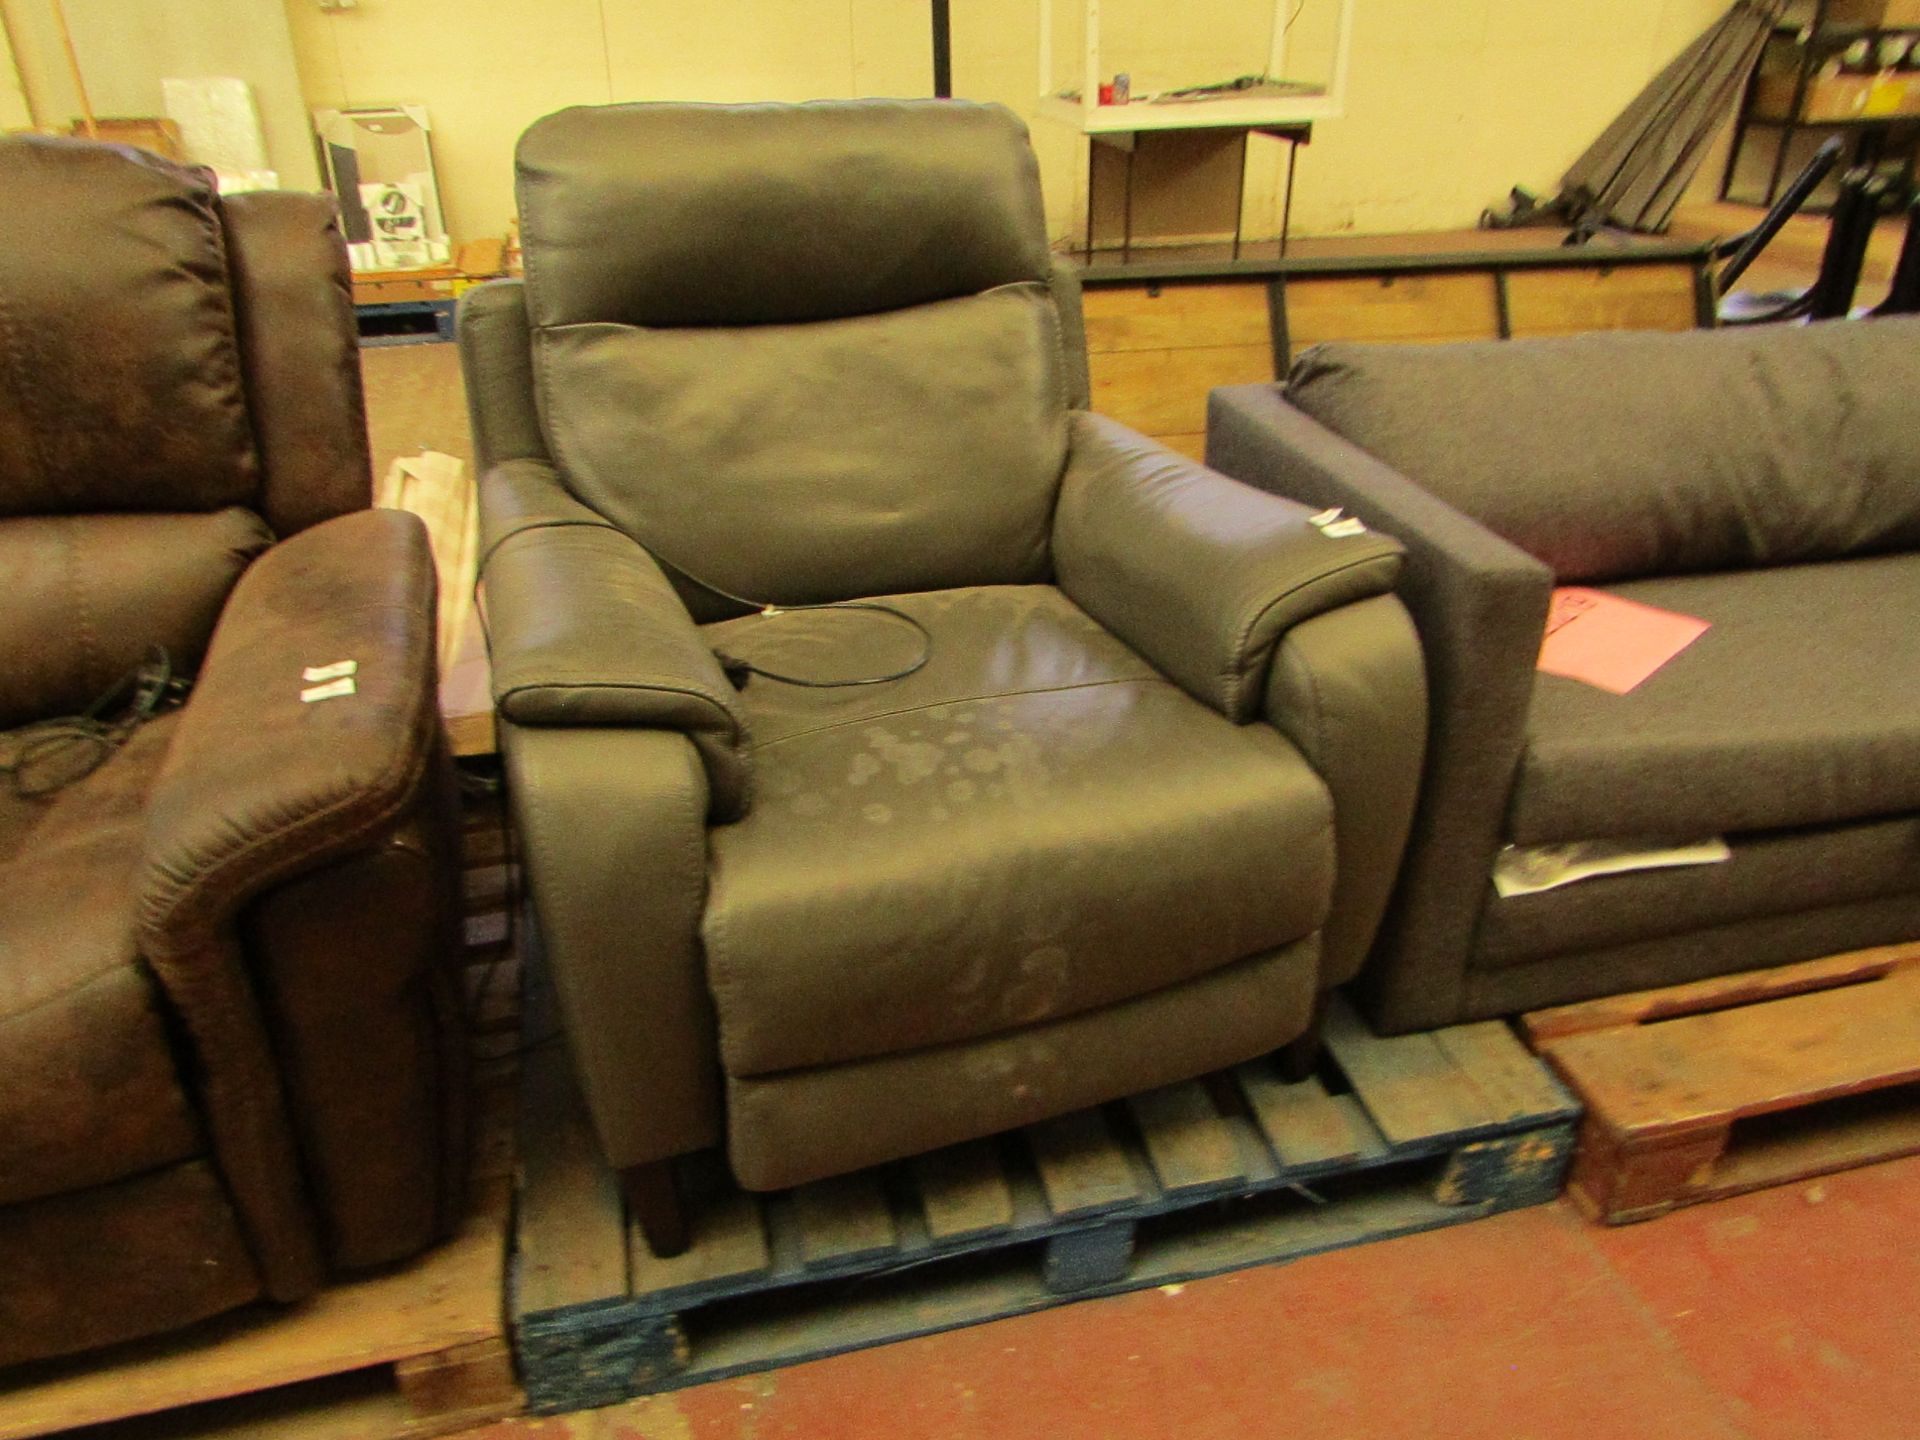 Barrett Grey leather reclining arm chair, tested working - Needs a clean